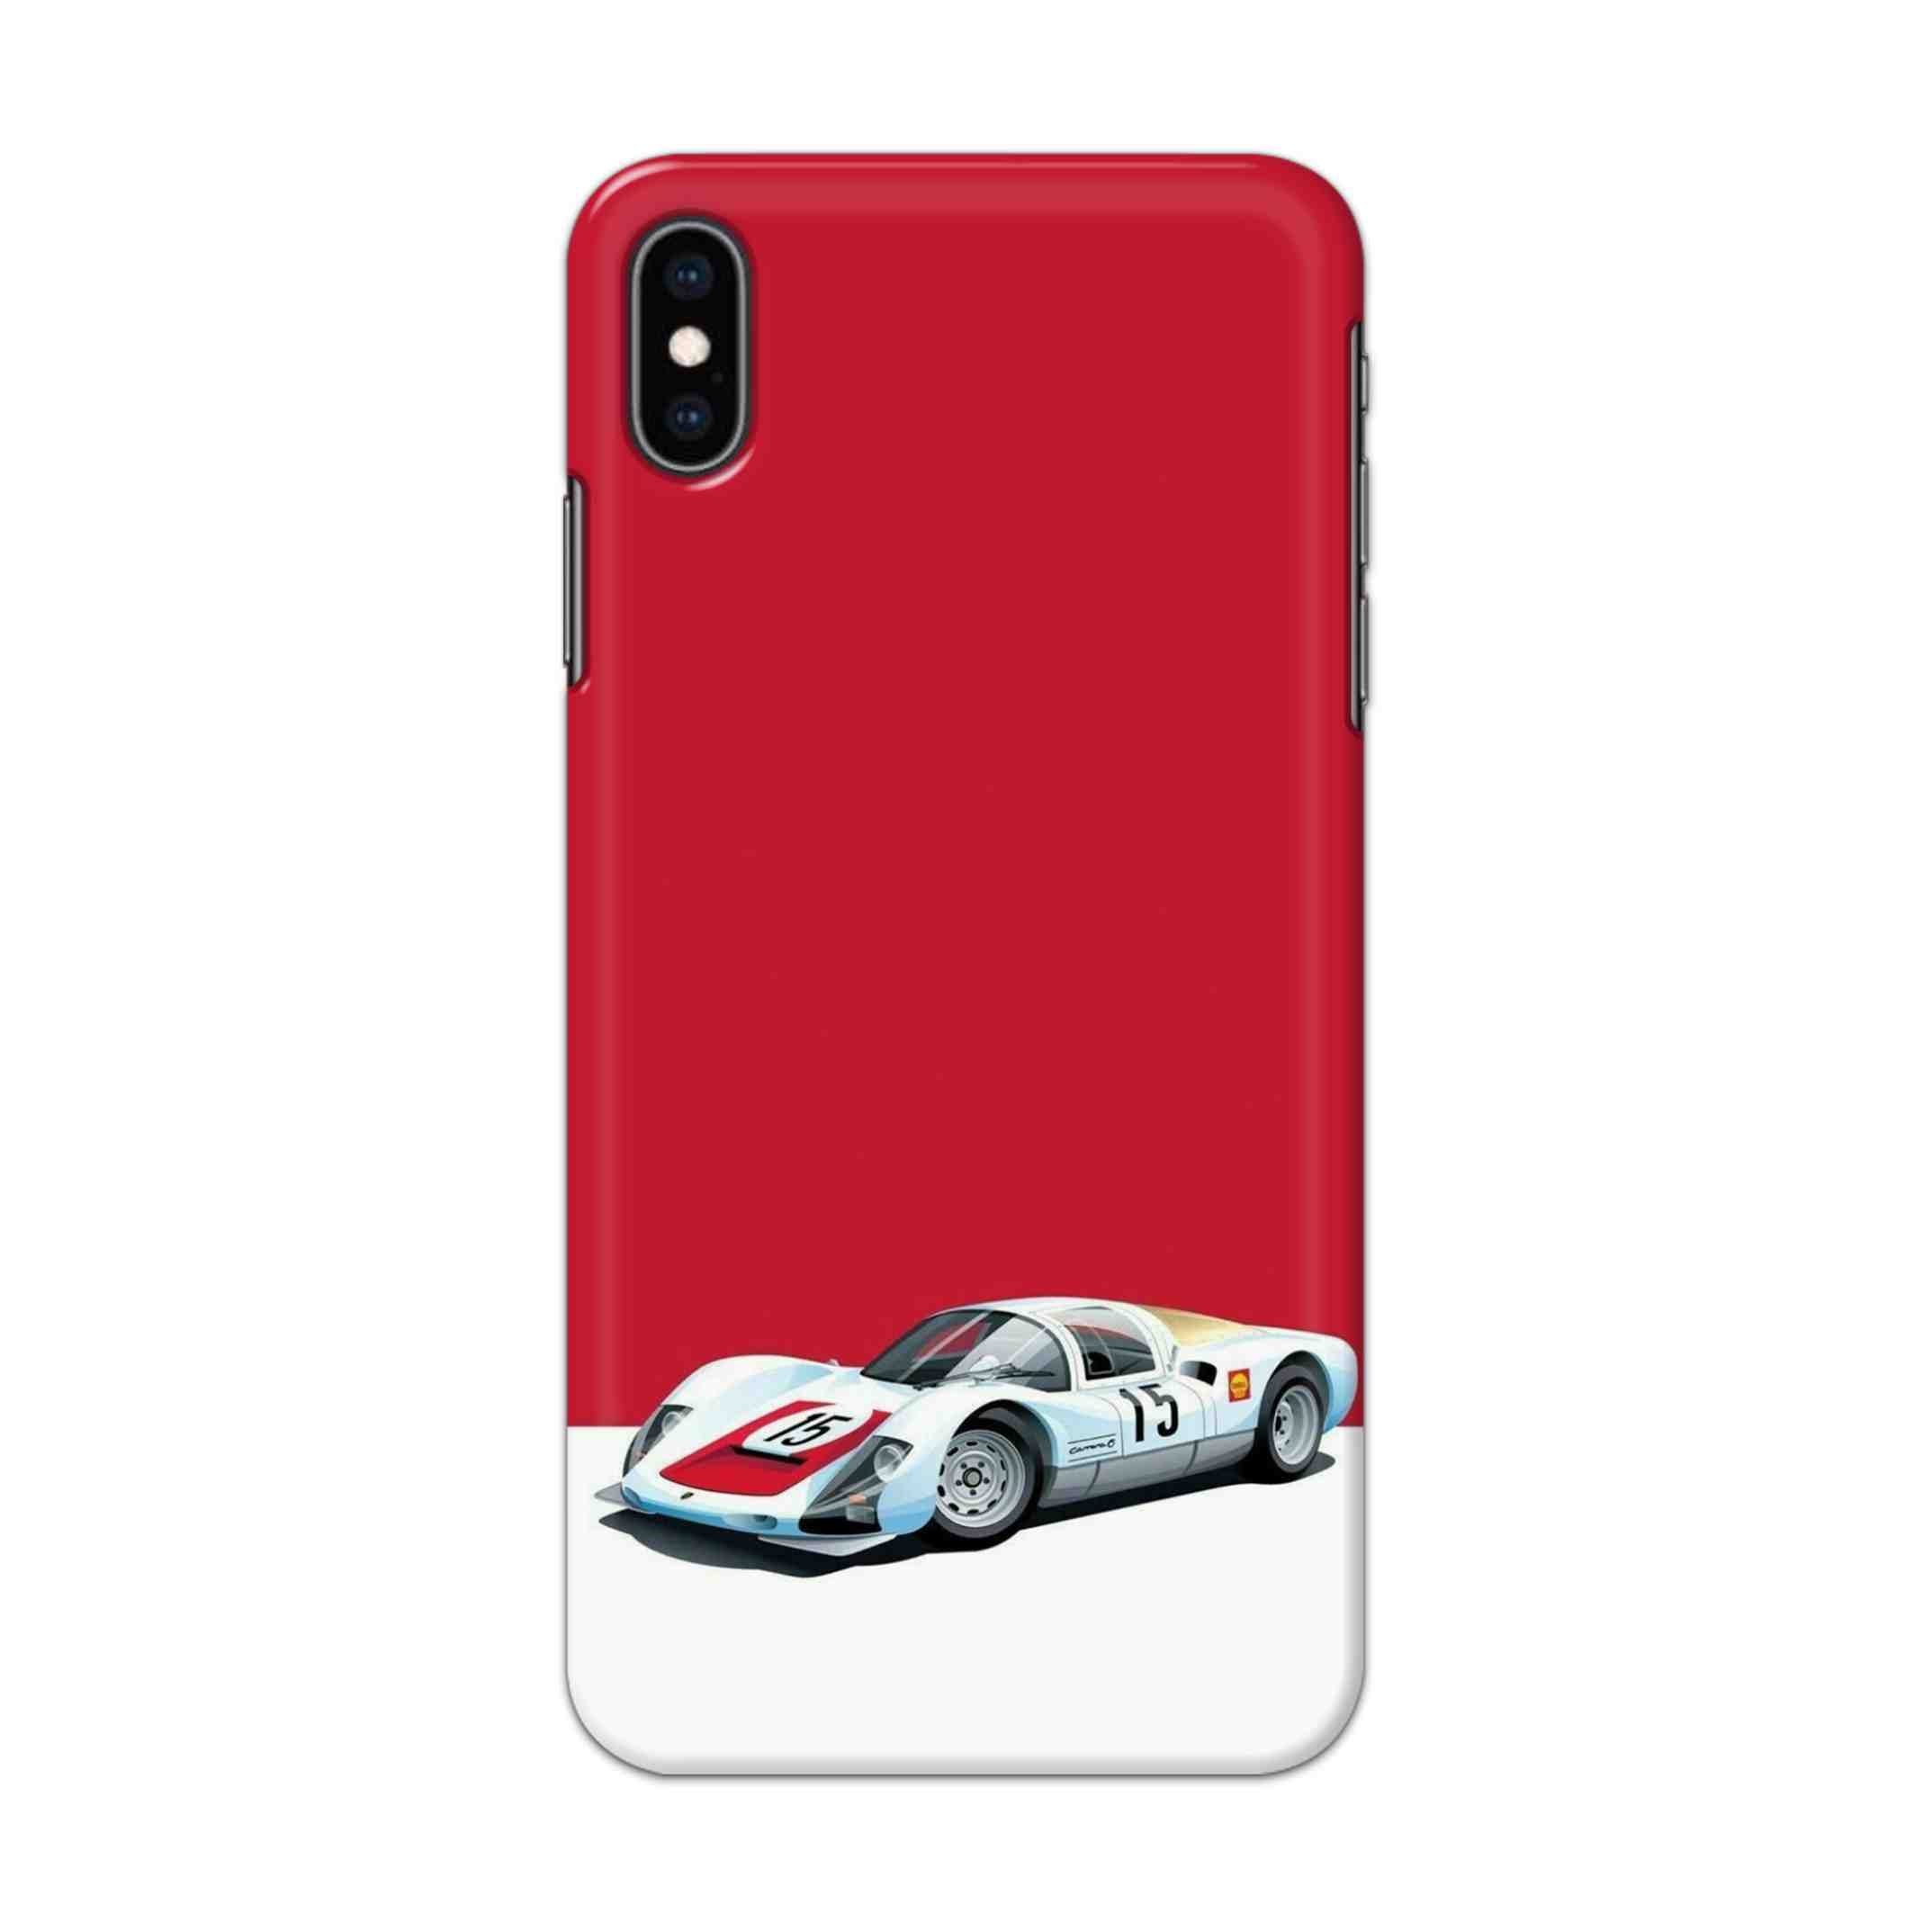 Buy Ferrari F15 Hard Back Mobile Phone Case/Cover For iPhone XS MAX Online